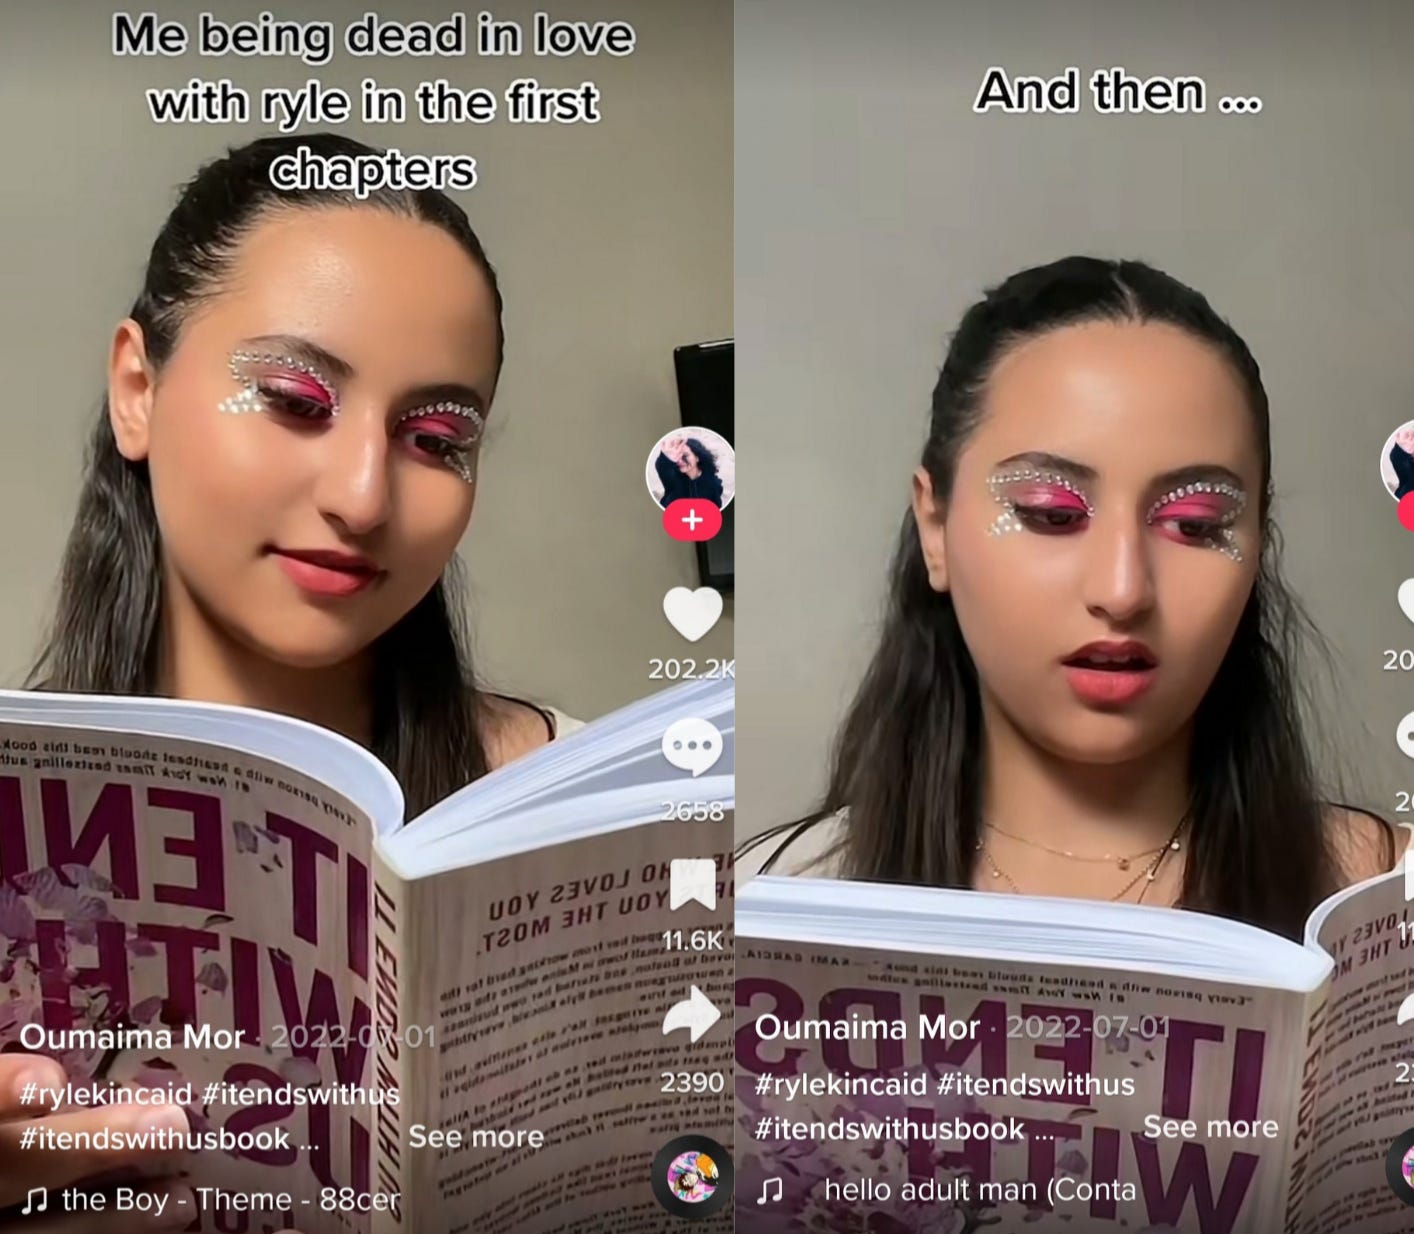 TikToker smiling while reading It Ends With Us by Colleen Hoover. In the first image, the caption says "me being in love with Ryle in the first chapters." In the second image, the same TikToker has read further into the book. The caption reads "and then" 